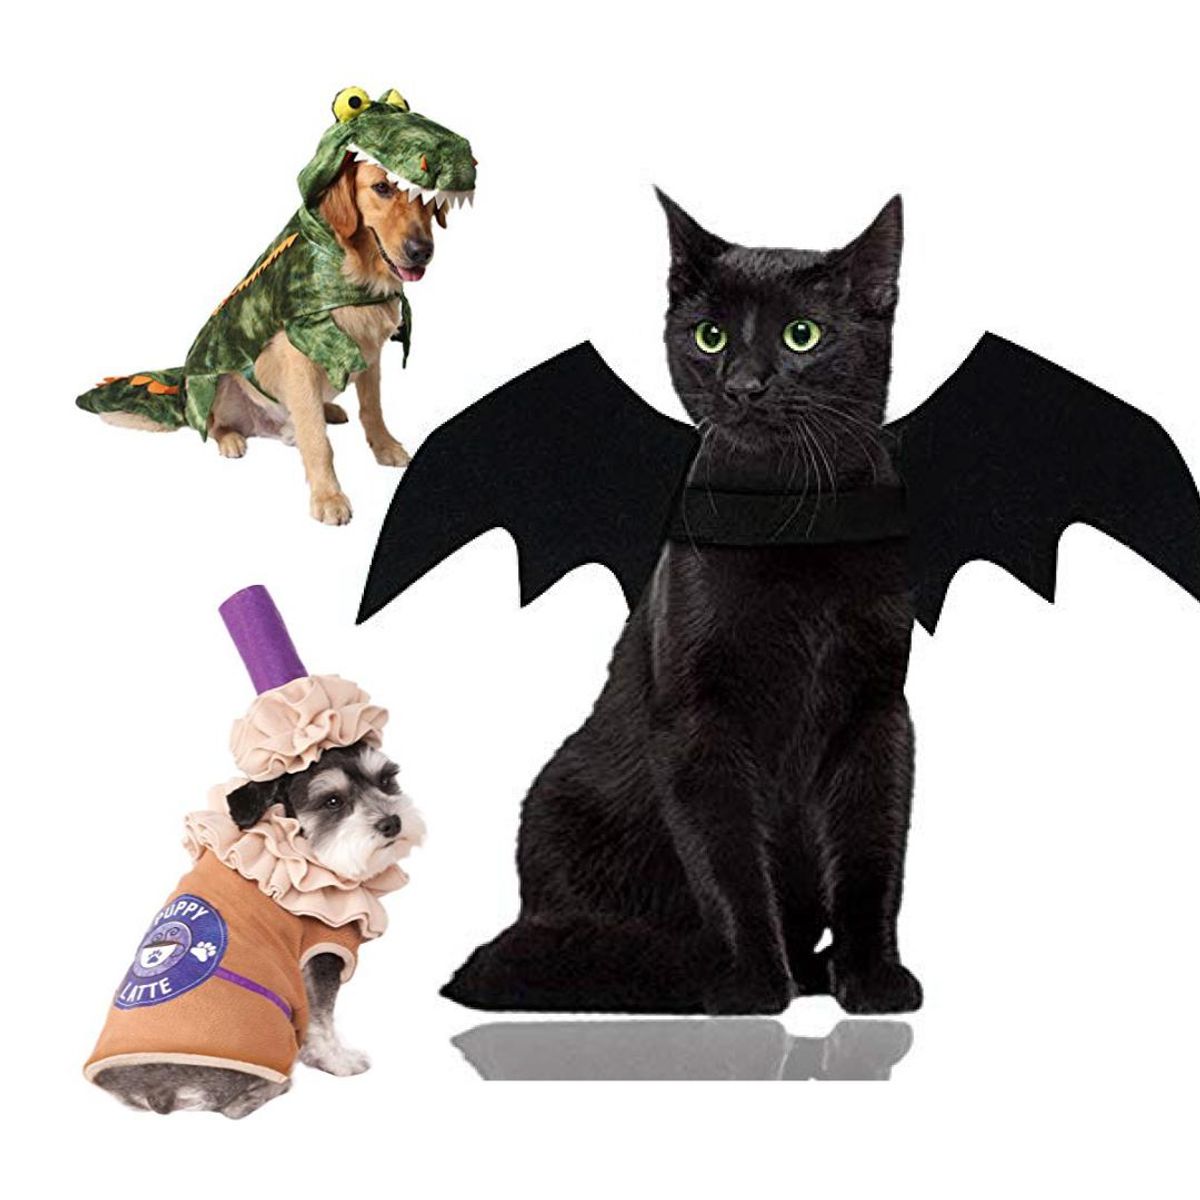 60 Of The Cutest Pet Costumes for the Spooky Season And Beyond